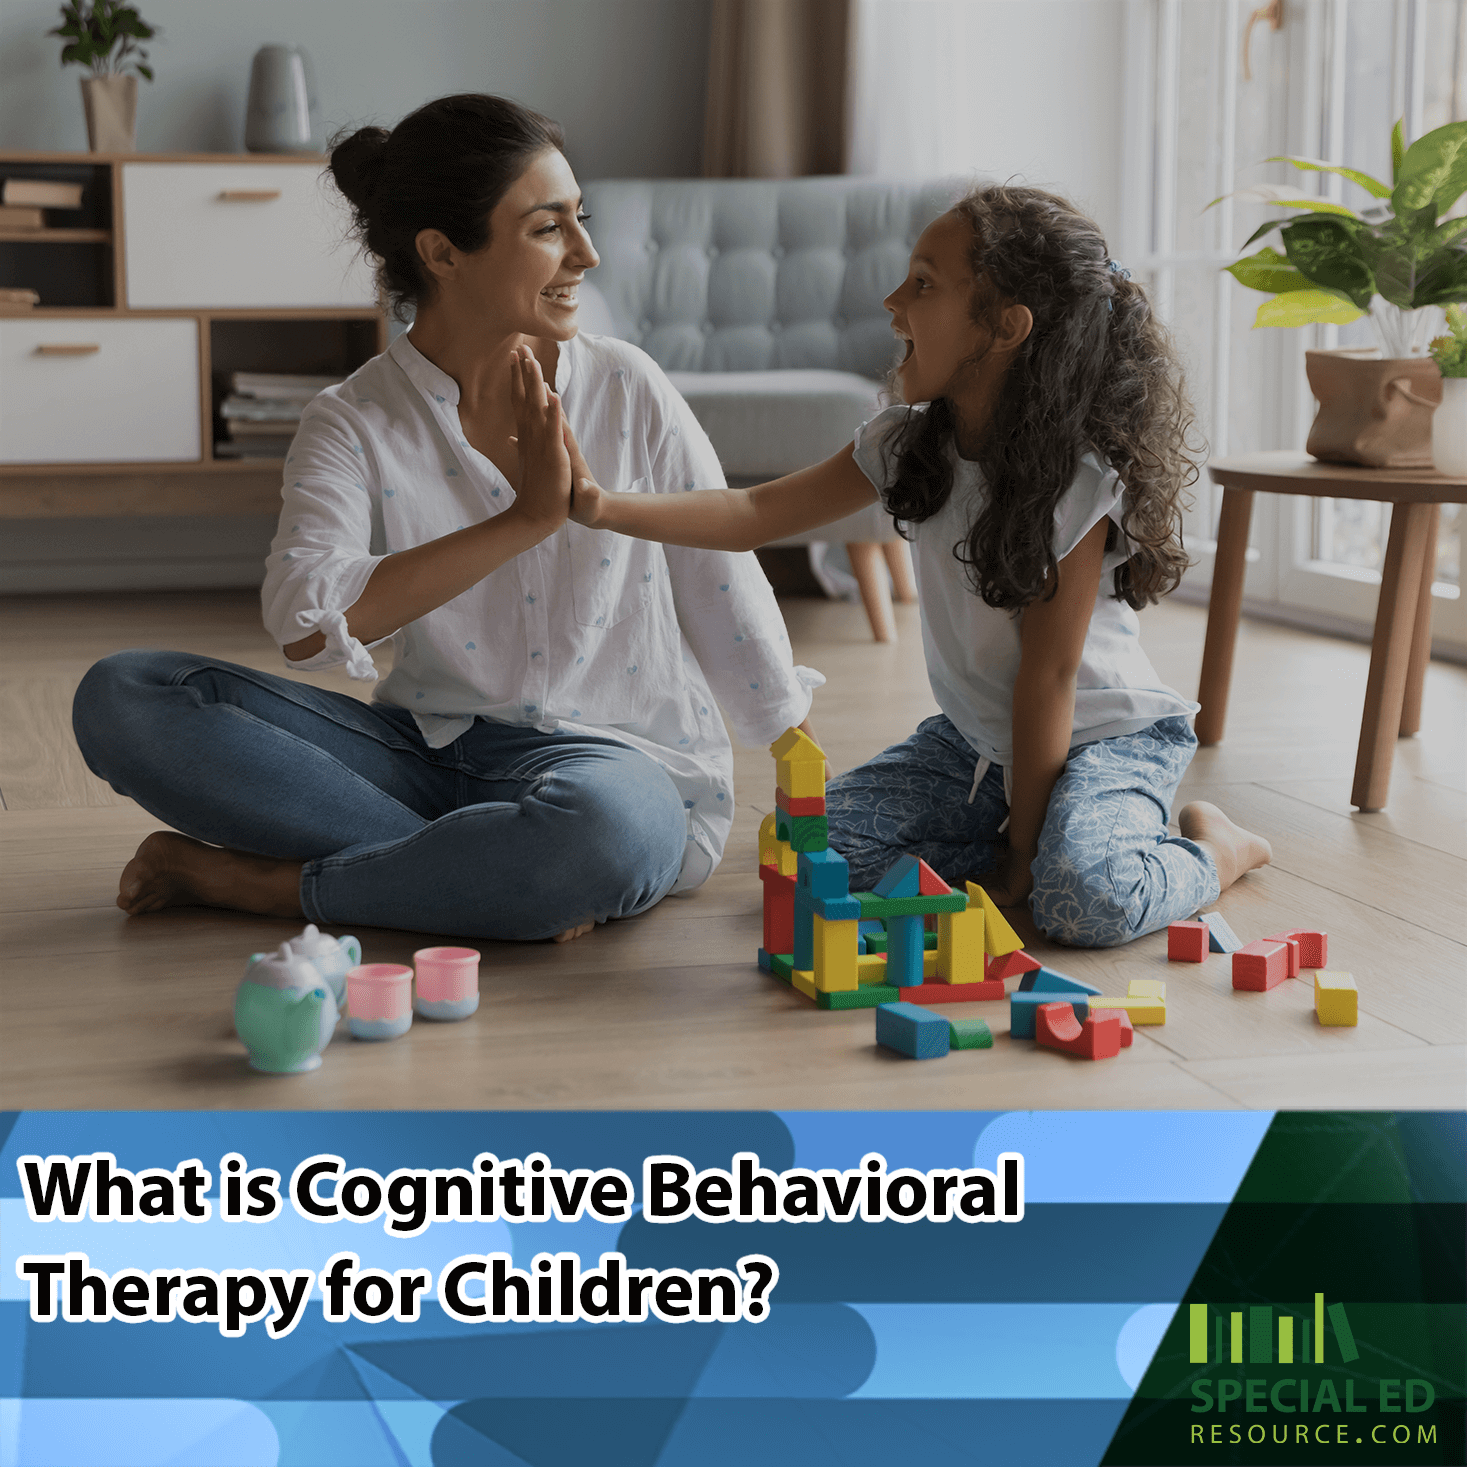 A woman and a young girl sit on the floor, facing each other and smiling while high-fiving. They are surrounded by colorful building blocks and other toys in a cozy room. The image includes an overlay text stating 'What is Cognitive Behavioral Therapy for Children?' along with the logo of SpecialEdResource.com at the bottom.